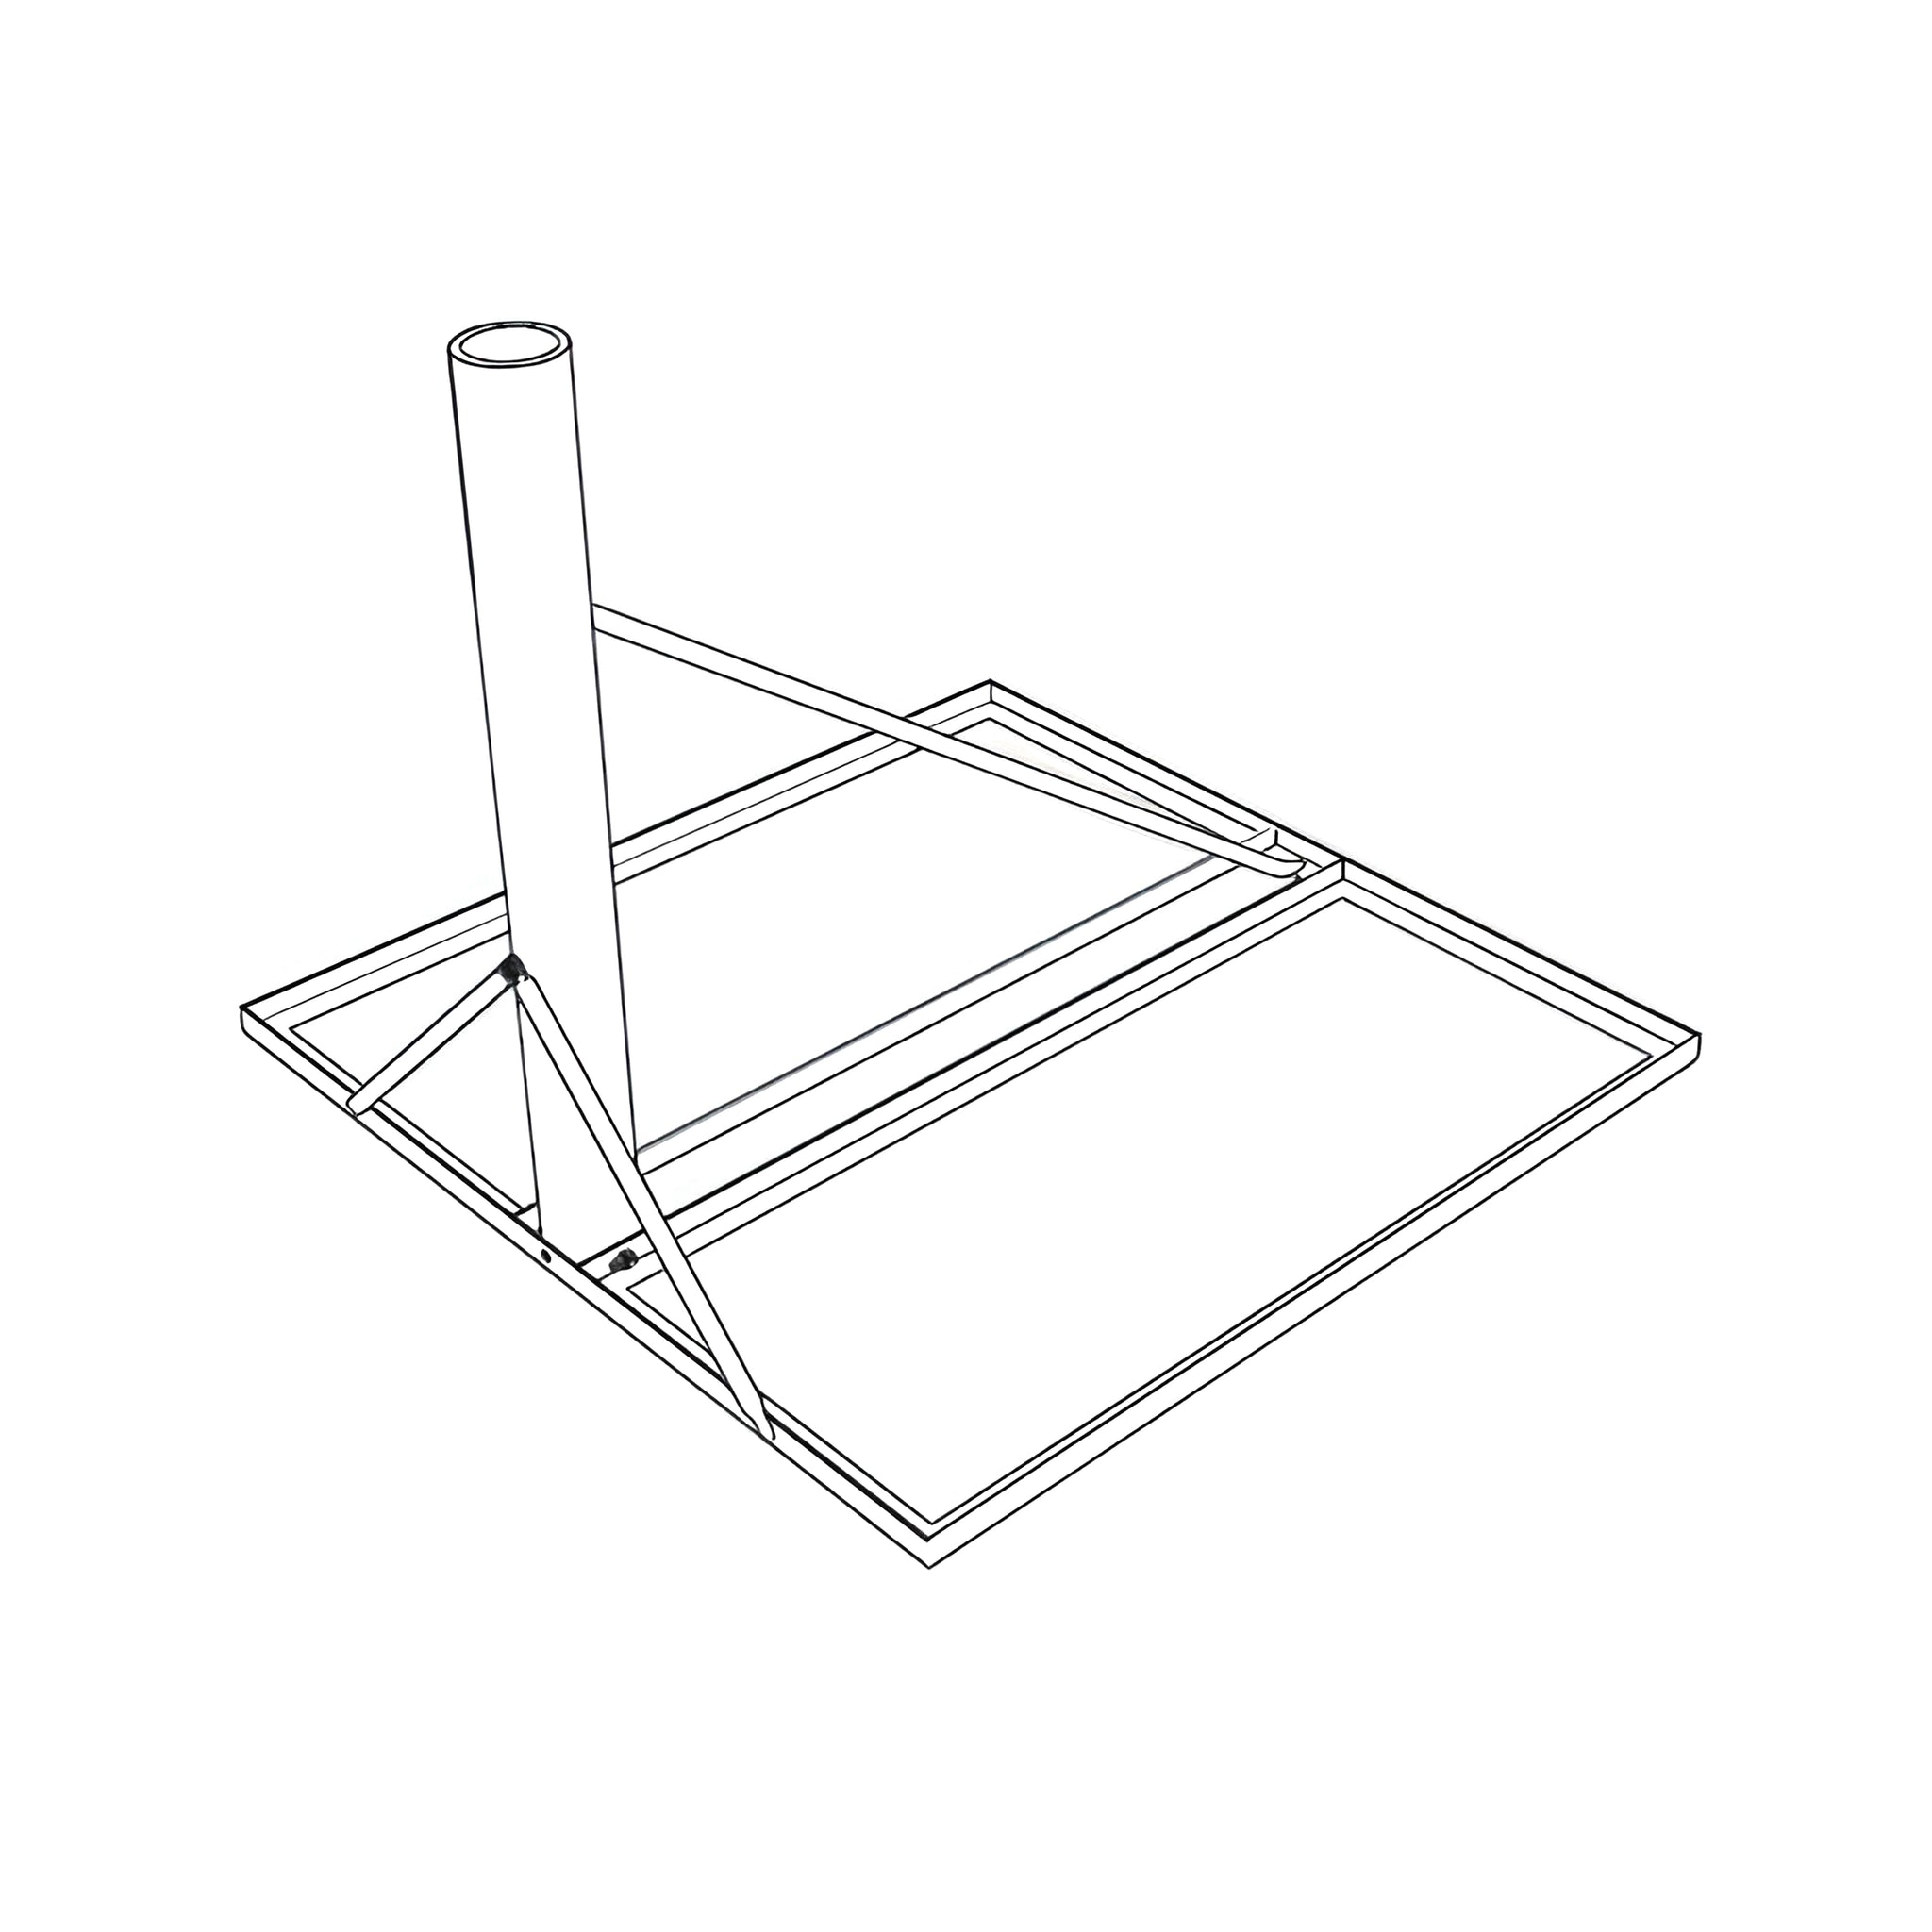 Non-Penetrating Roof Mount for 75cm, 84Ecm, 90cm and 1m Antenna Systems